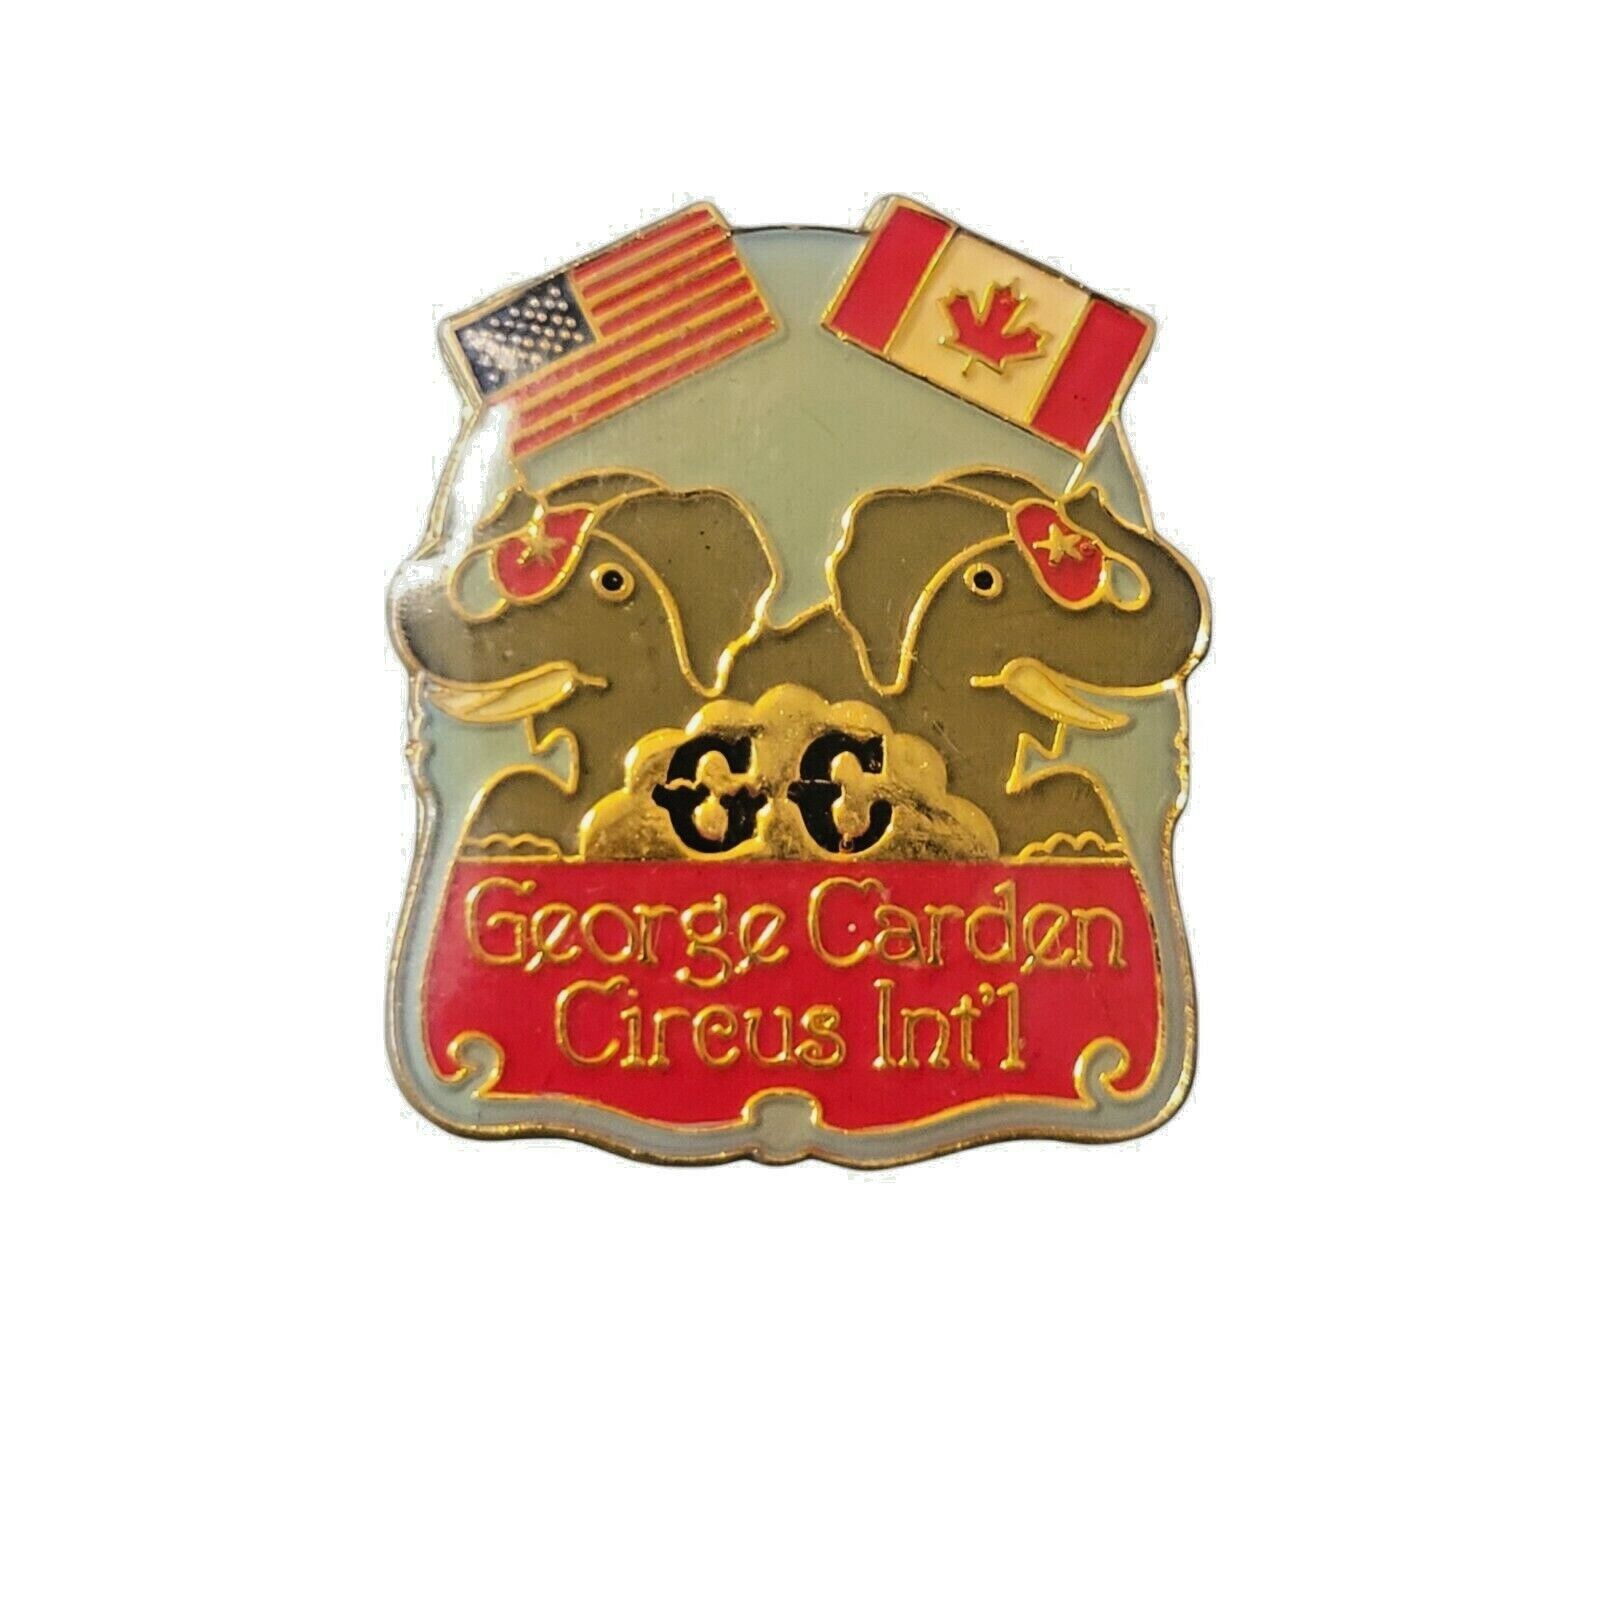 GEORGE CARDEN CIRCUS INT\'L Lapel Pin - Elephants US Canadian Flags